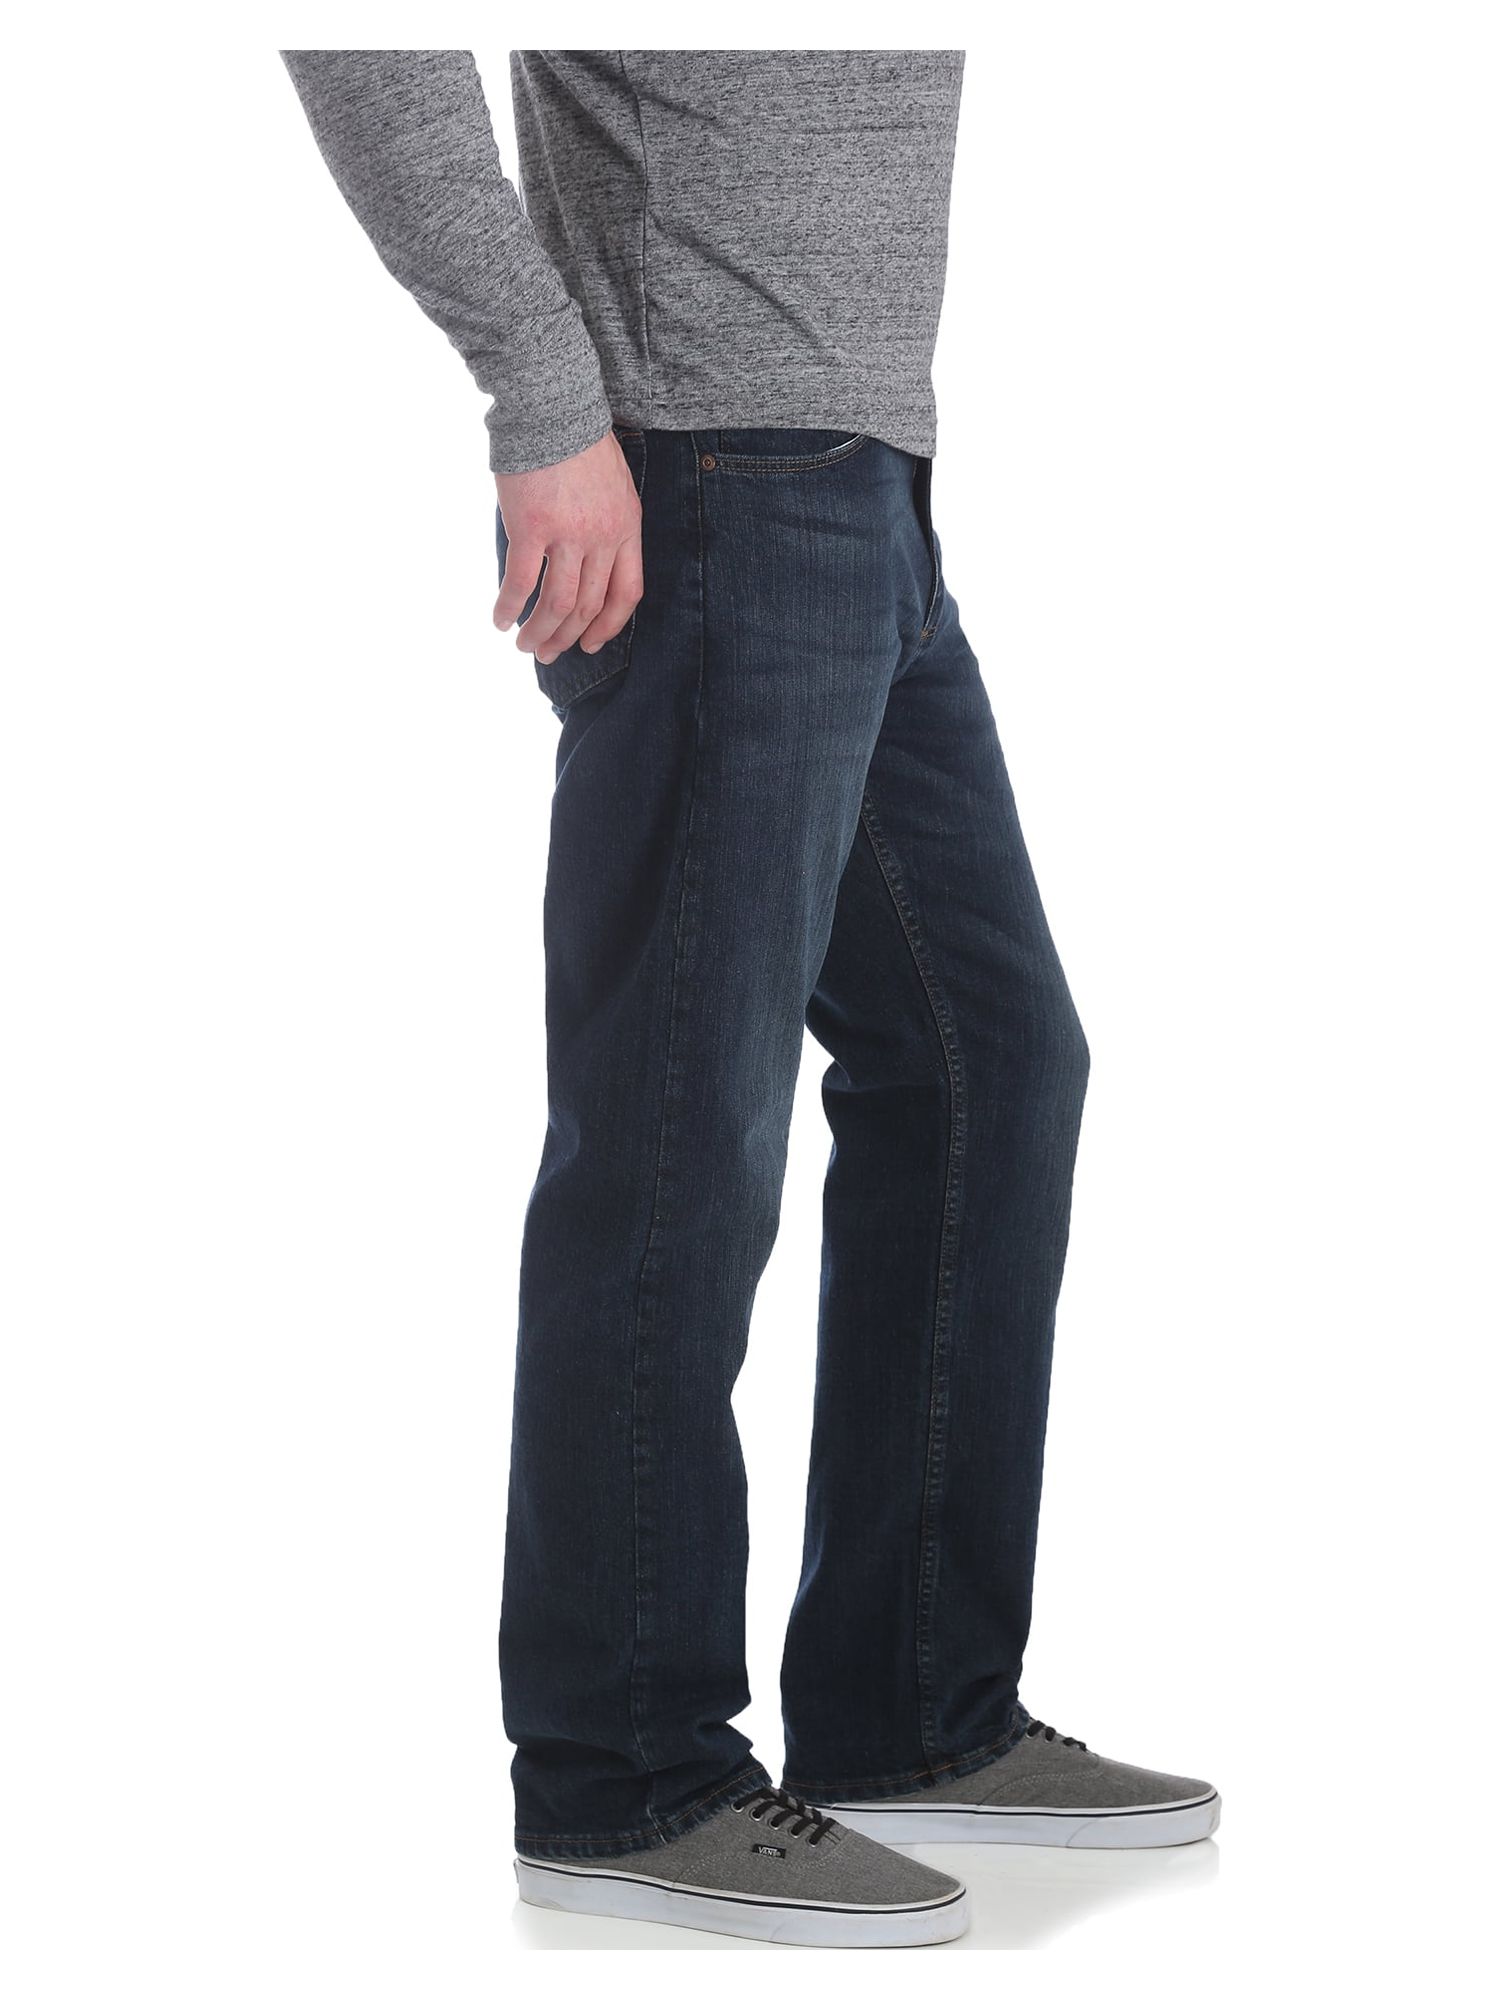 Wrangler Men's and Big Men's Relaxed Fit Jeans with Flex - image 5 of 8